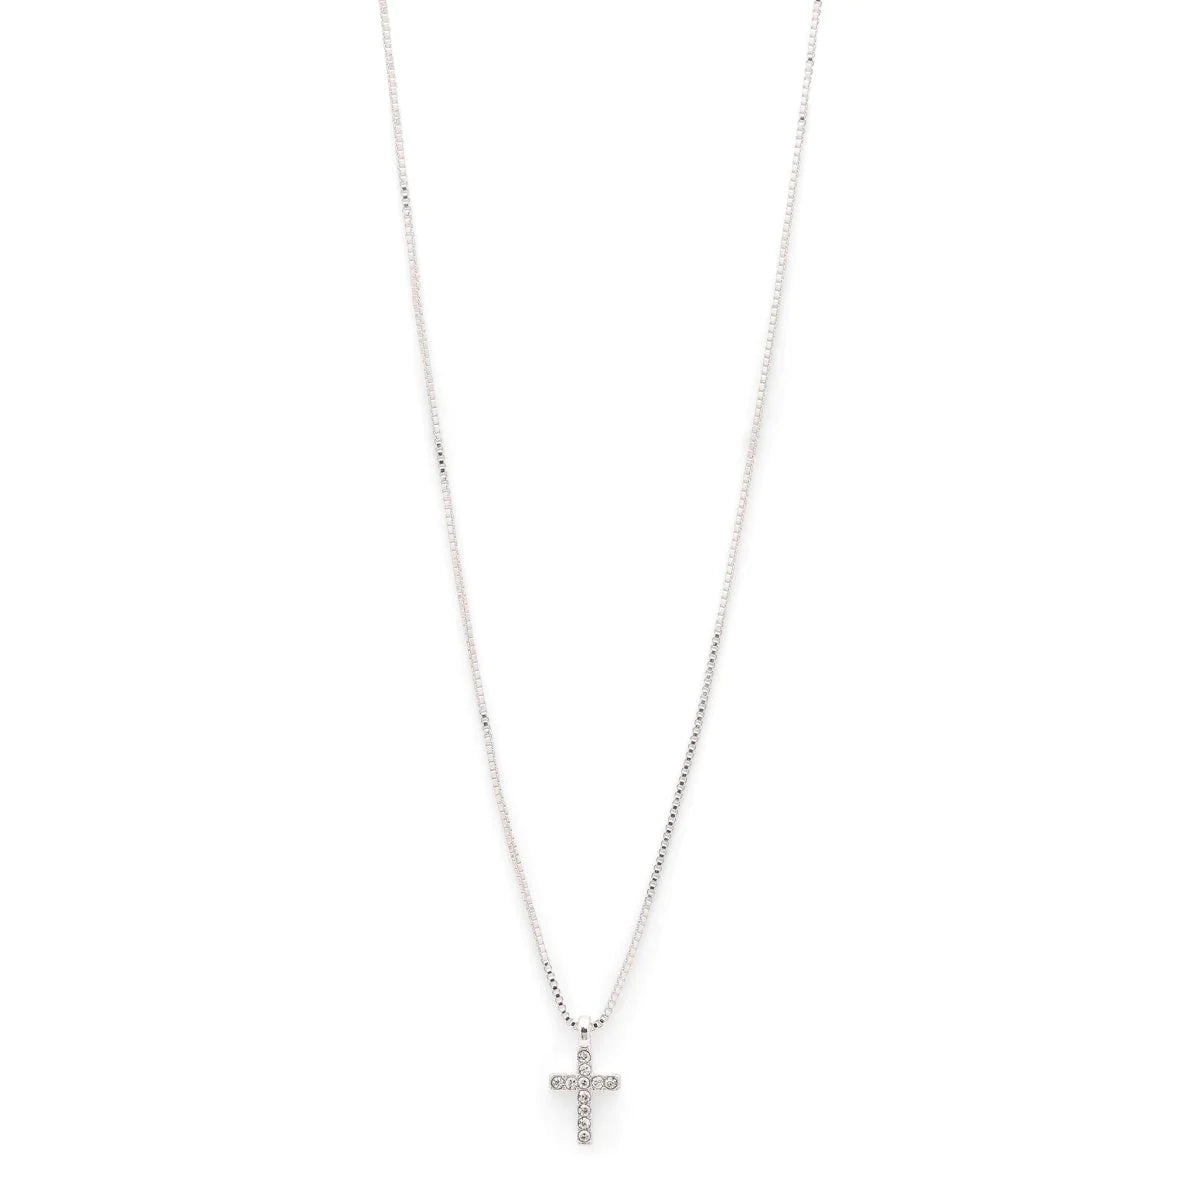 CLARA cross necklace - silver played crystal